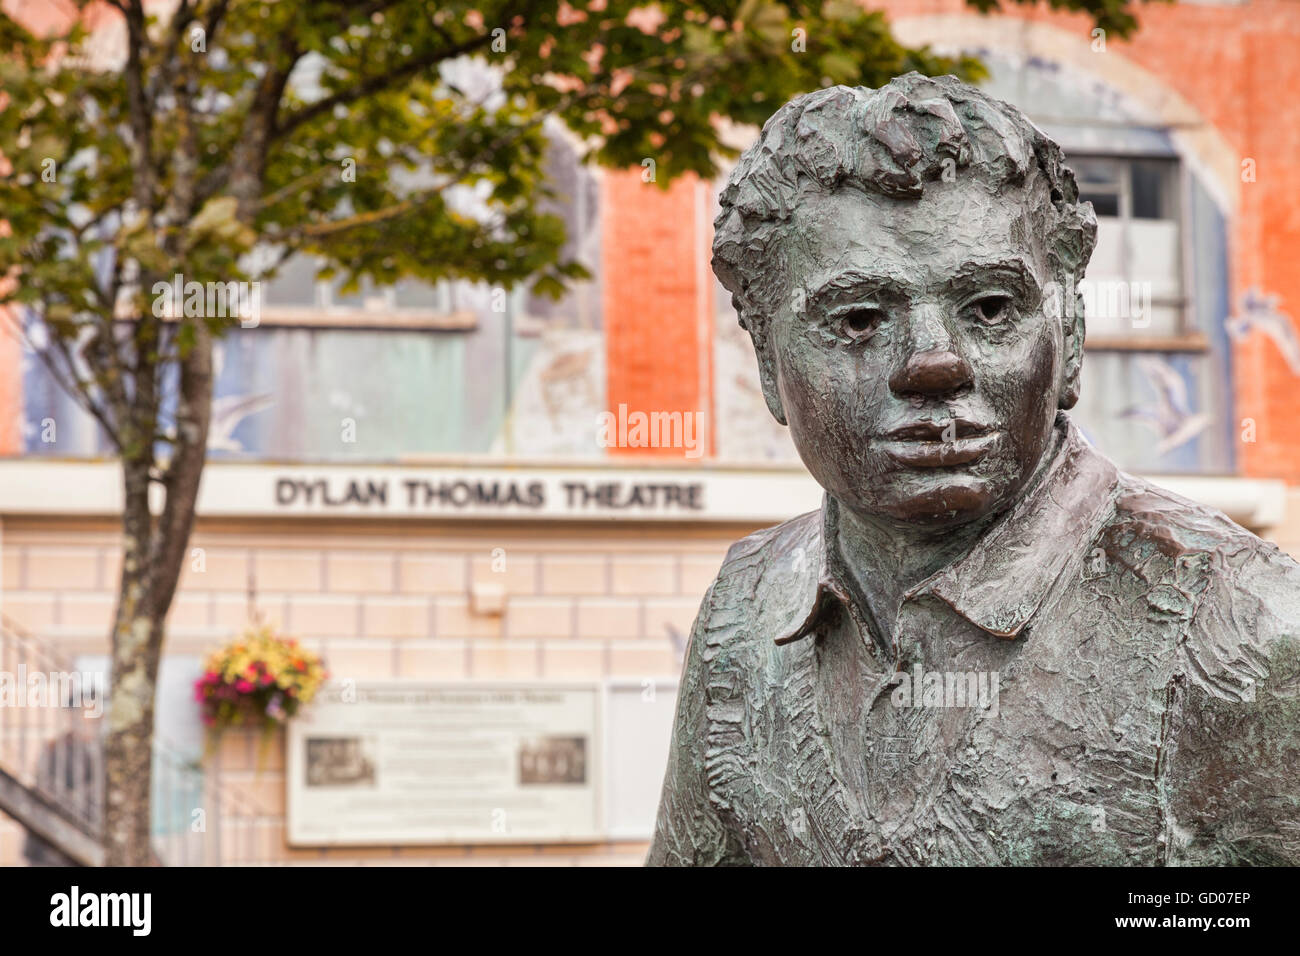 Swansea, Wales: 1 July 2016 - Sculpture of Dylan Thomas by John Doubleday, in front of the Dylan Thomas Theatre, Swansea Marina, Stock Photo